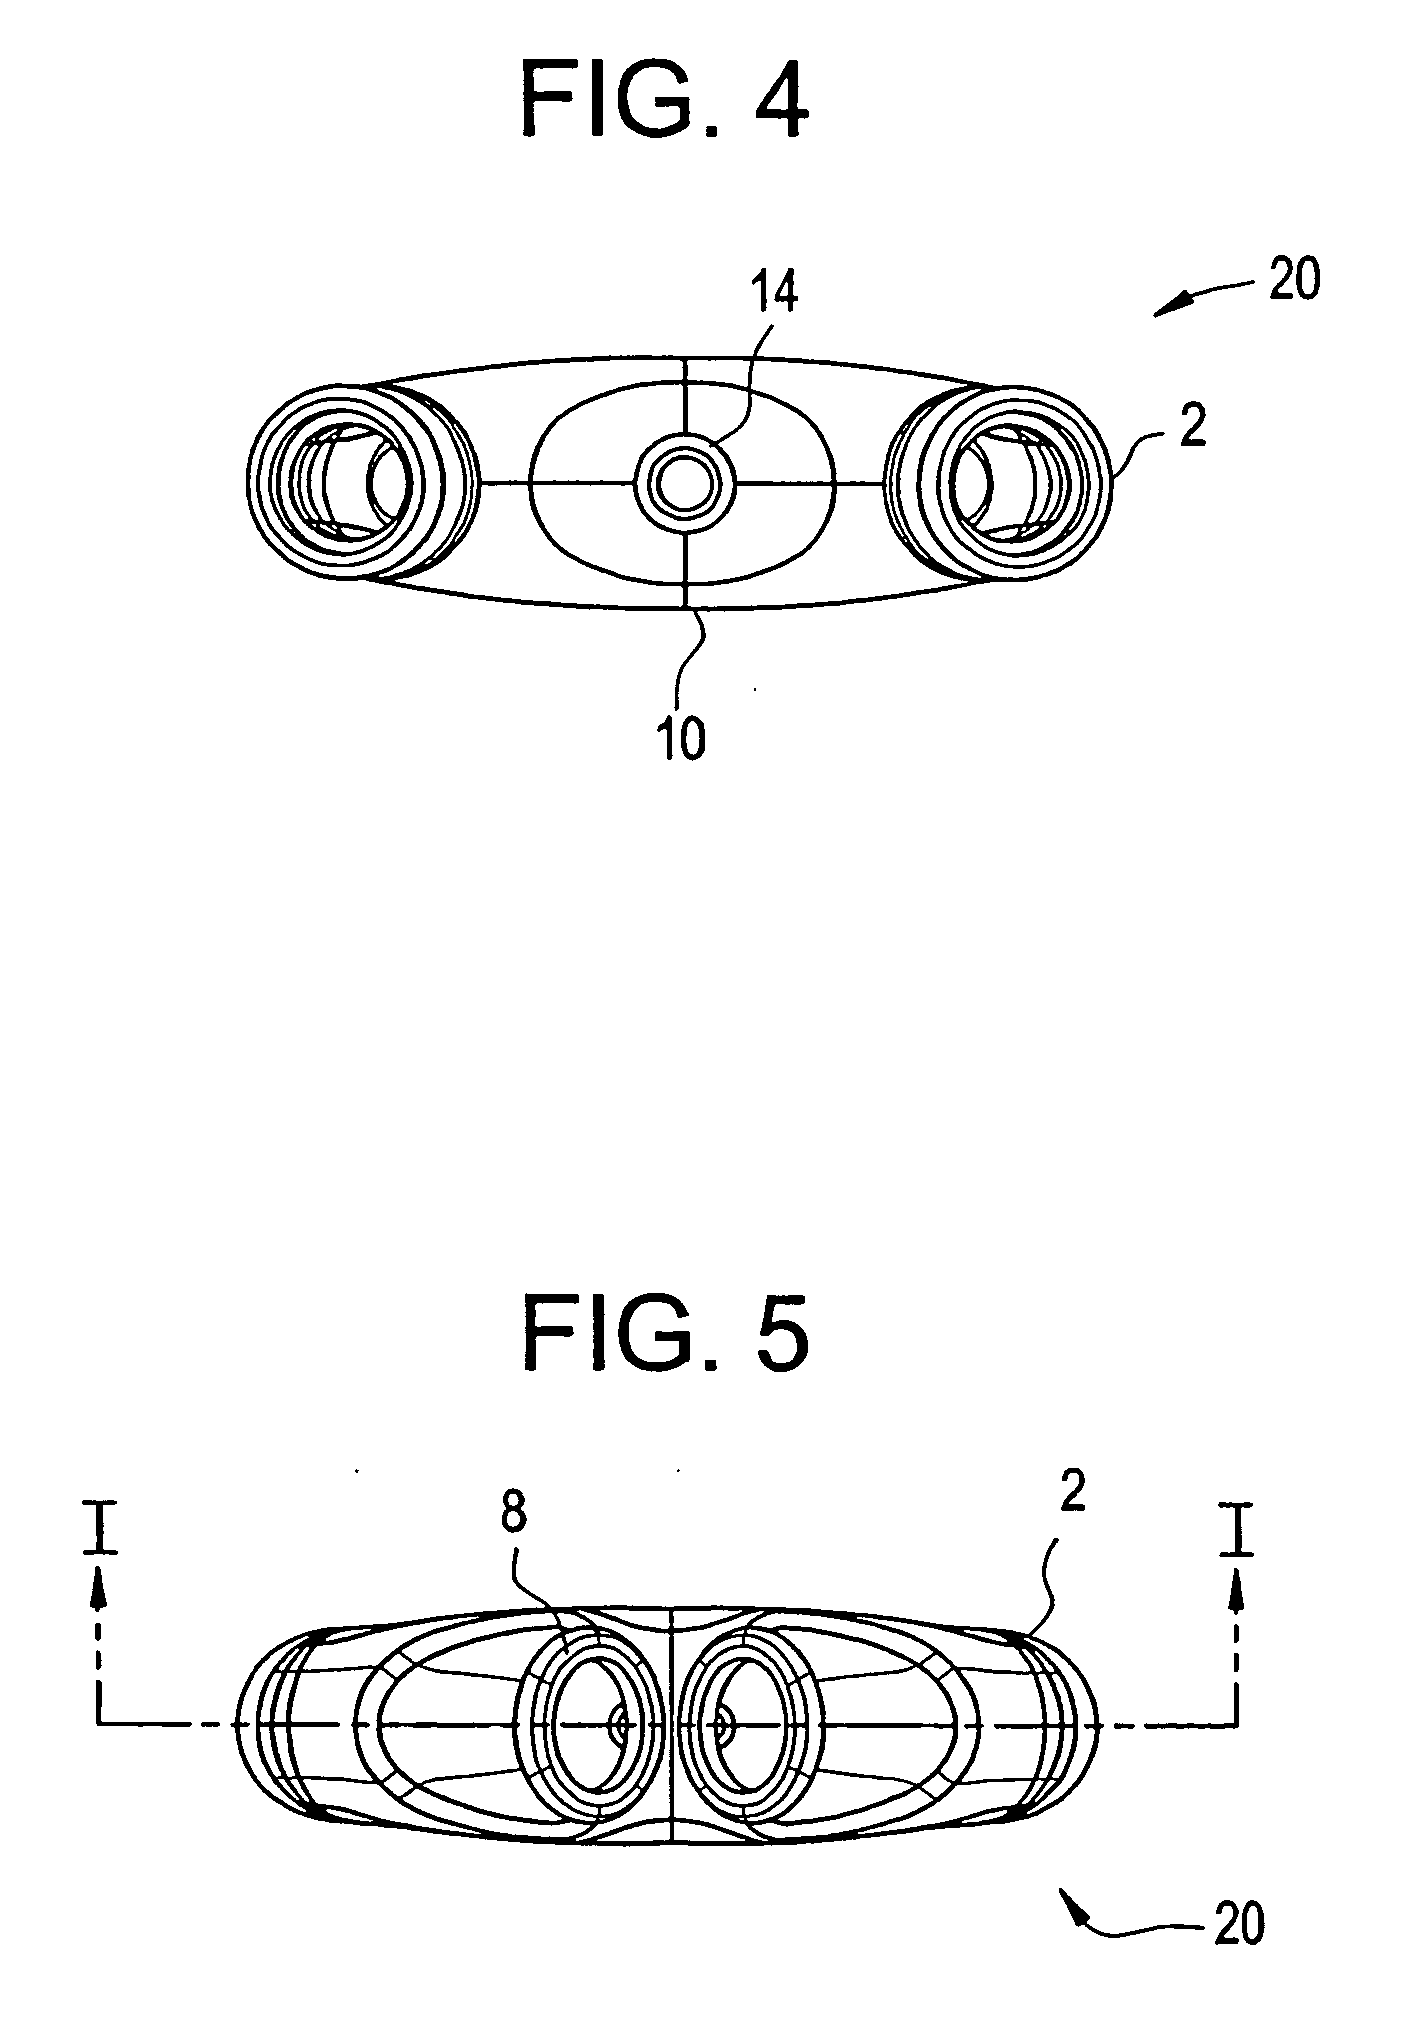 Nasal ventilation interface and system